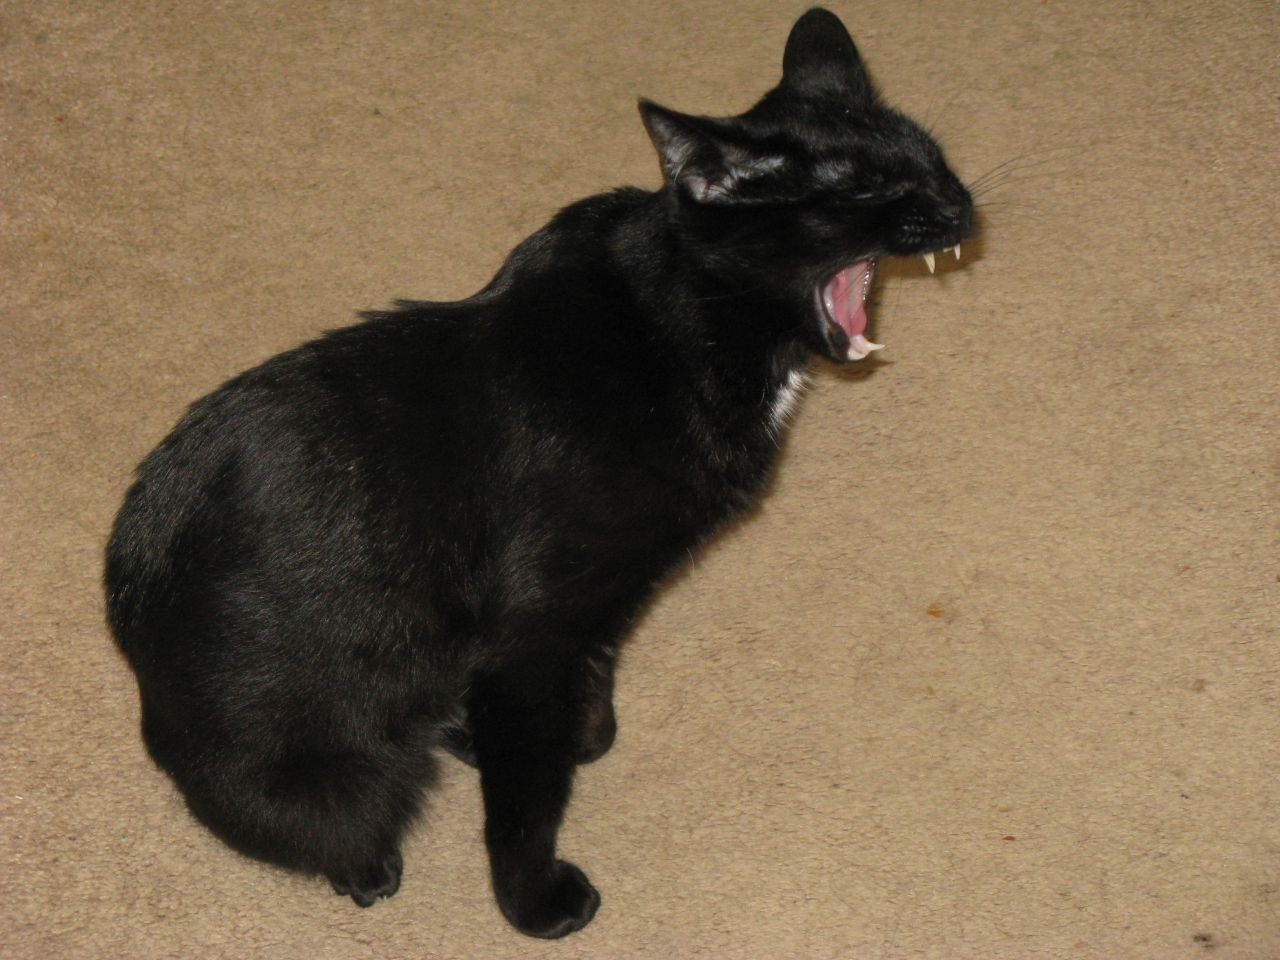 a cat sitting on the floor with its mouth open